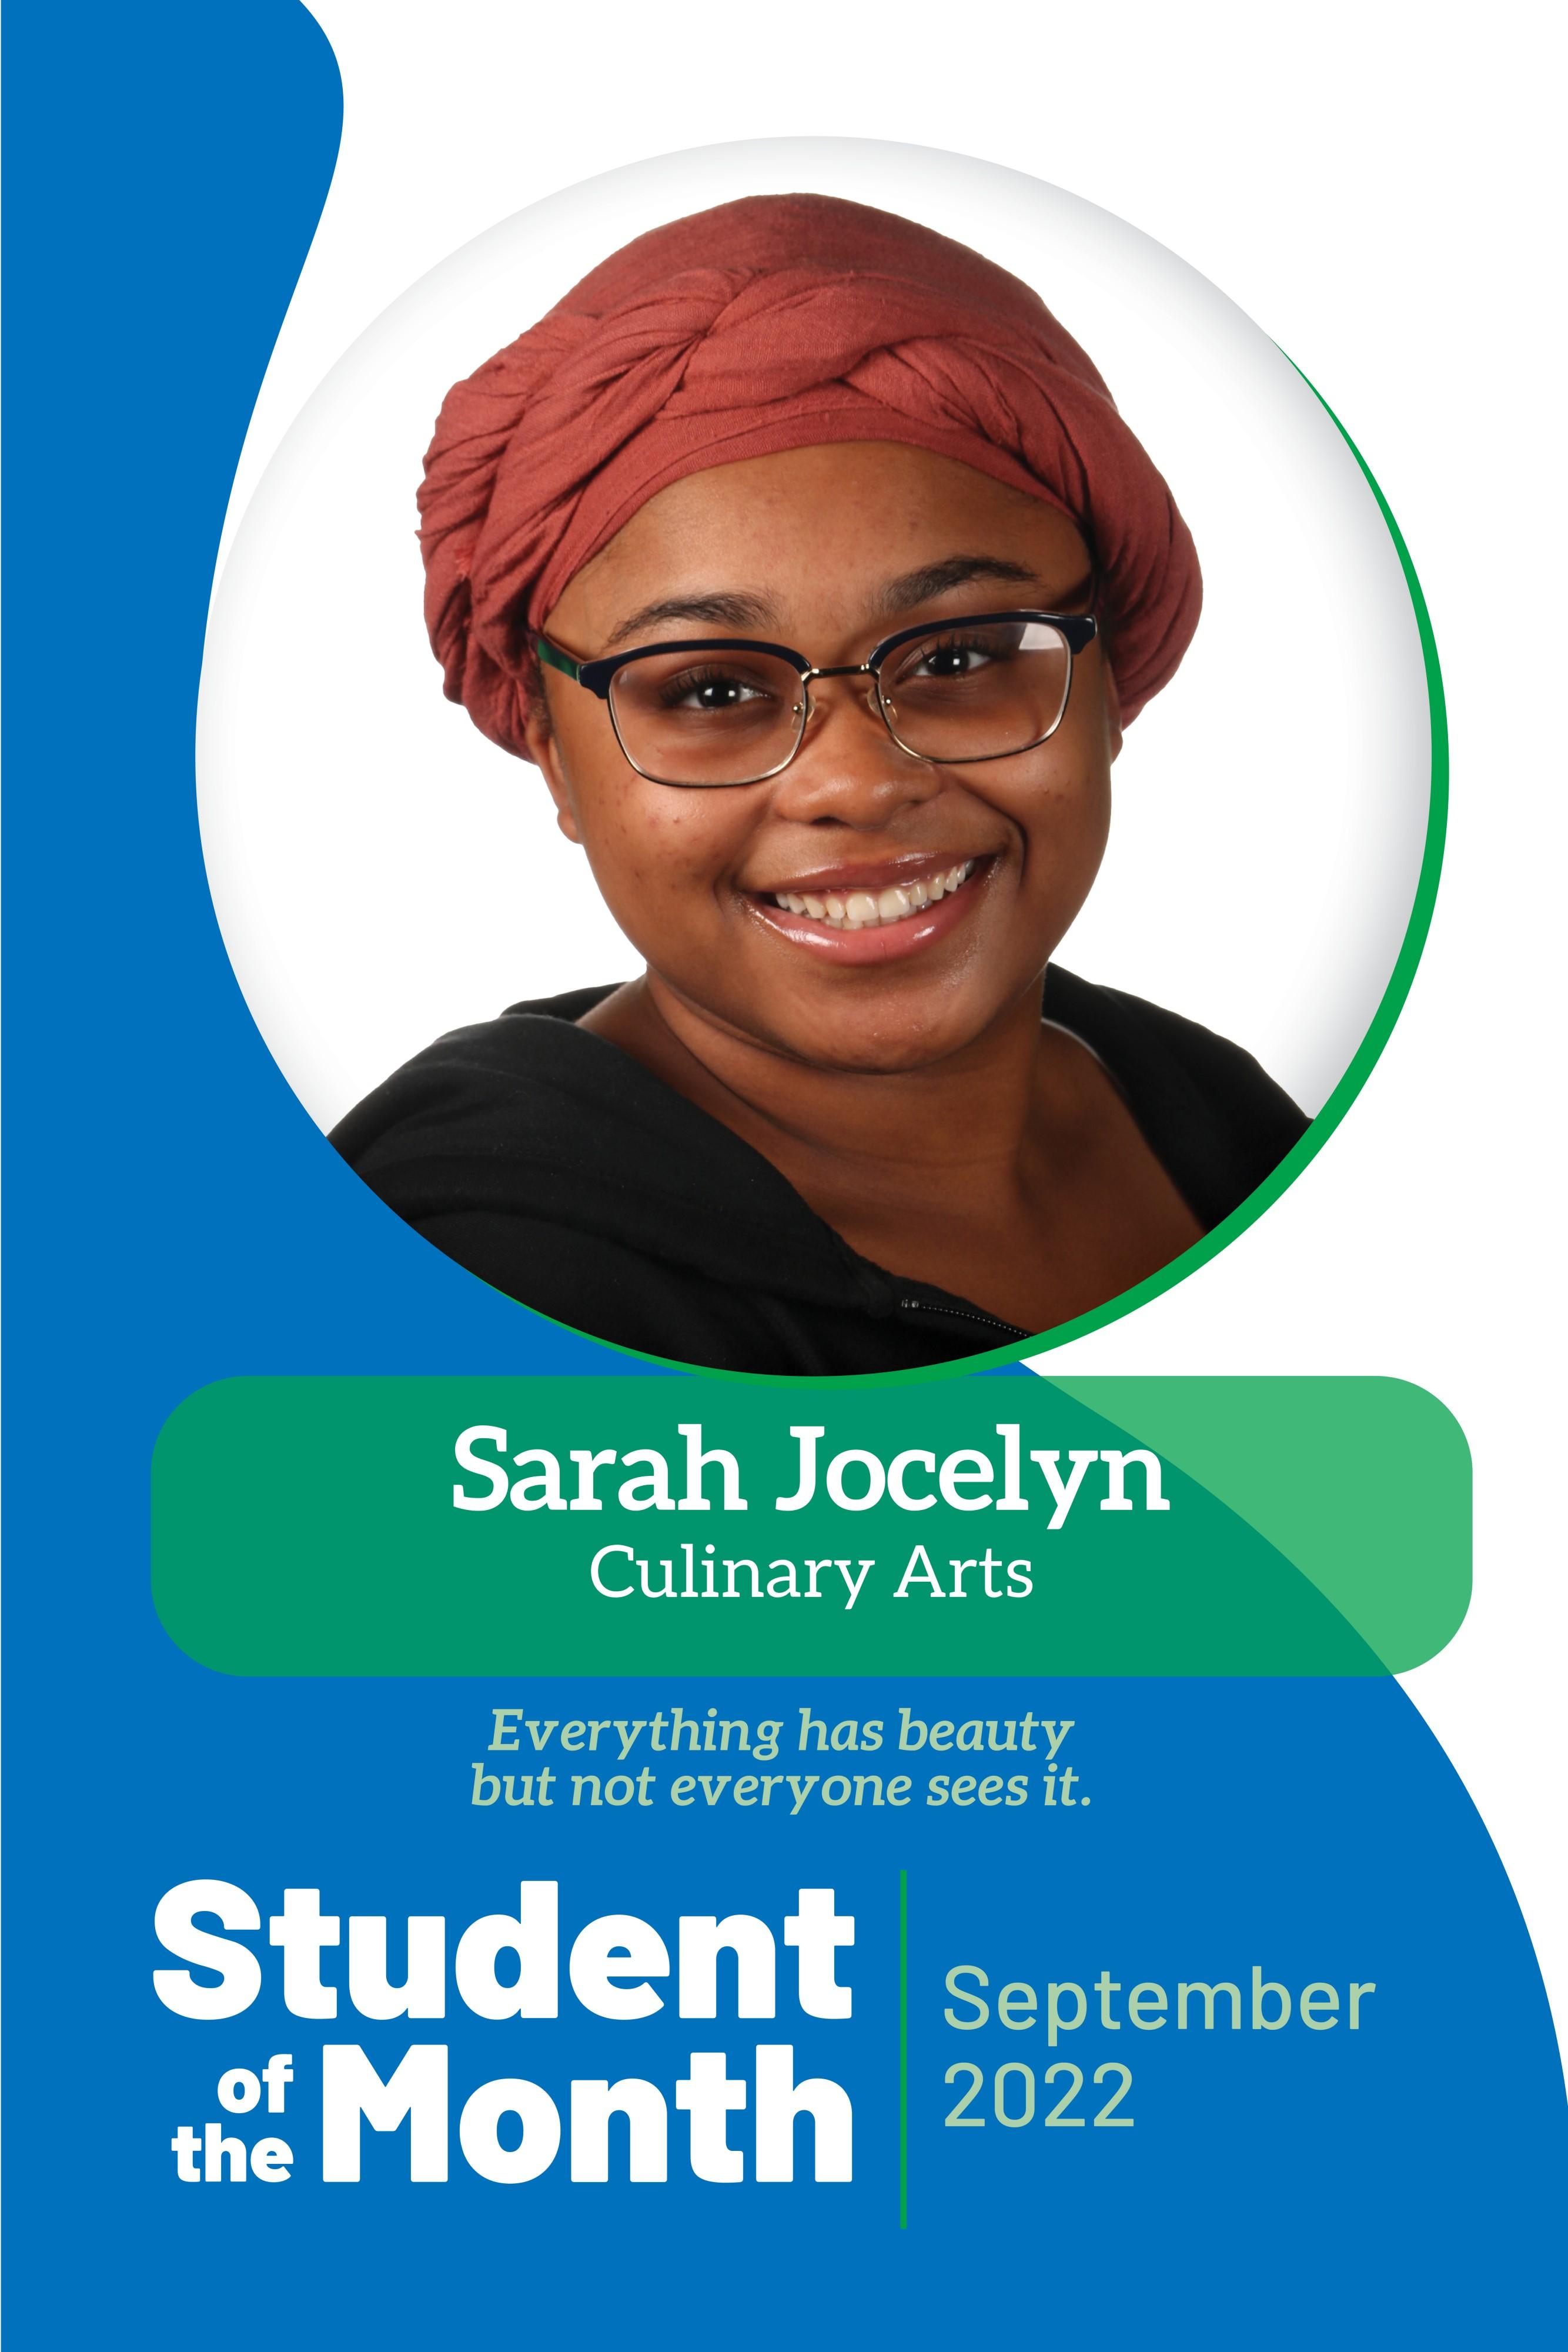 poster of Sarah Jocelyn featured as student of the month